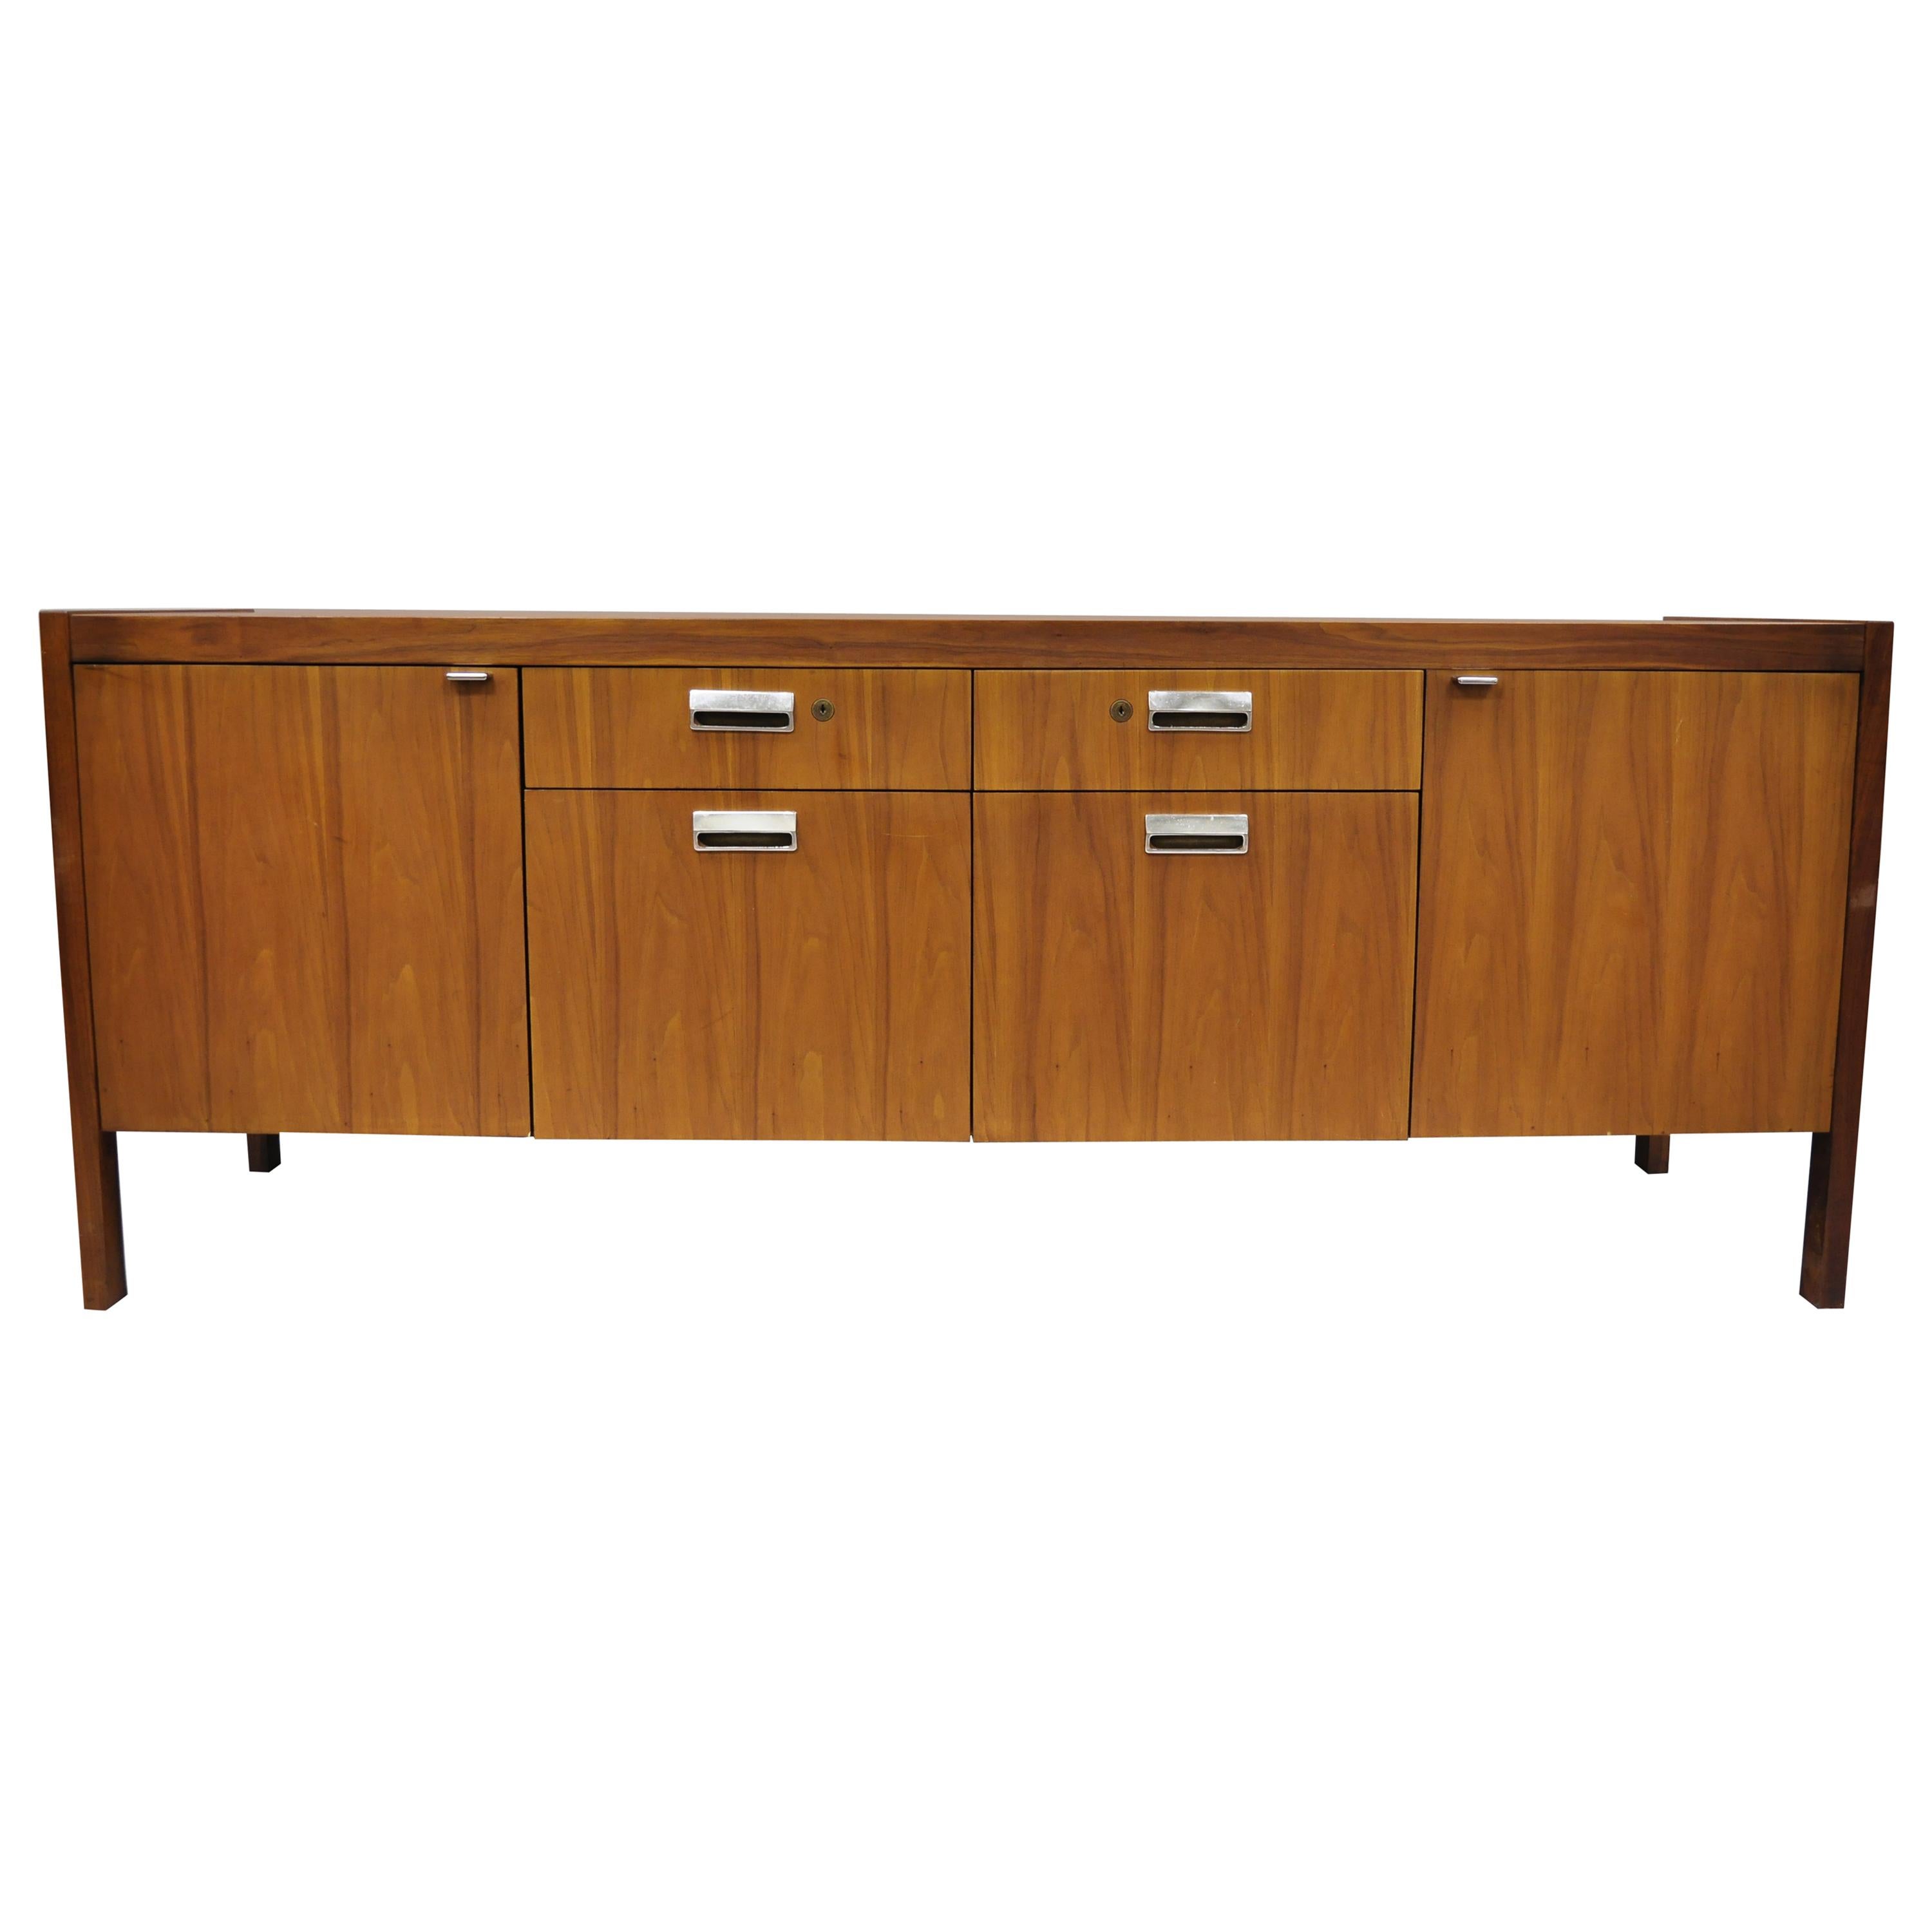 Walnut & Teak Knoll Style Credenza Cabinet Attributed to Stow Davis